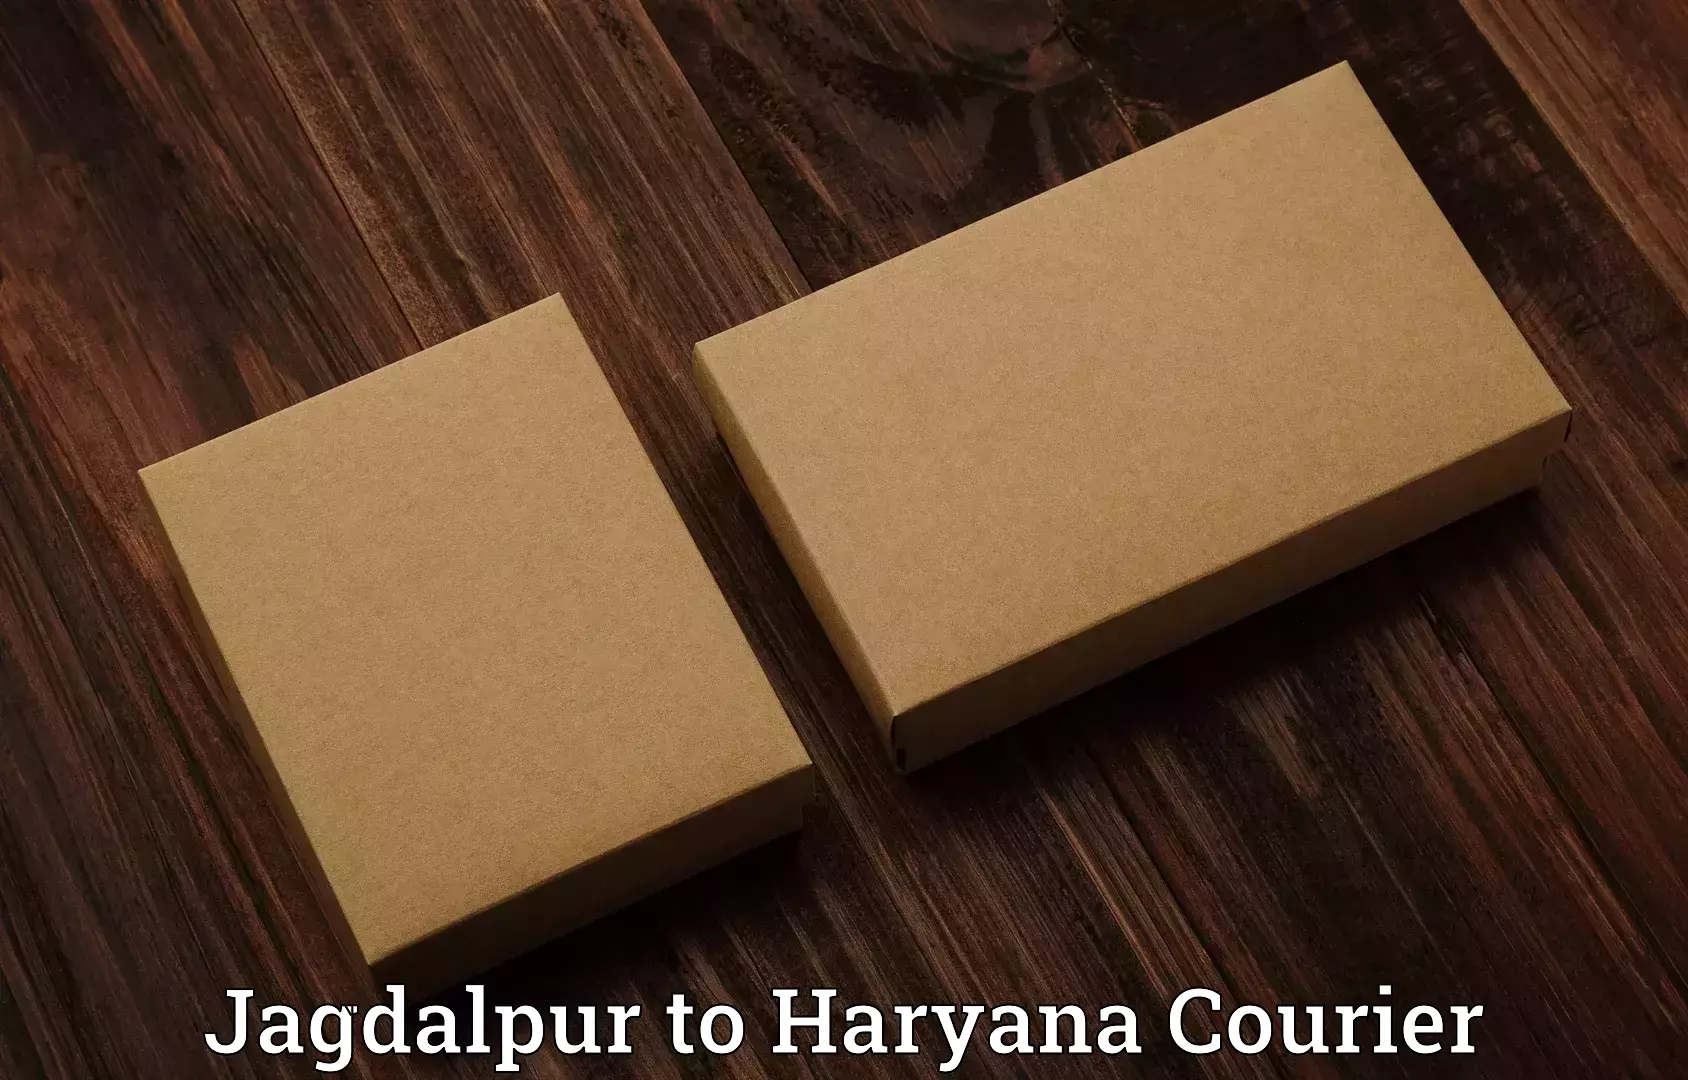 Express luggage delivery Jagdalpur to NCR Haryana